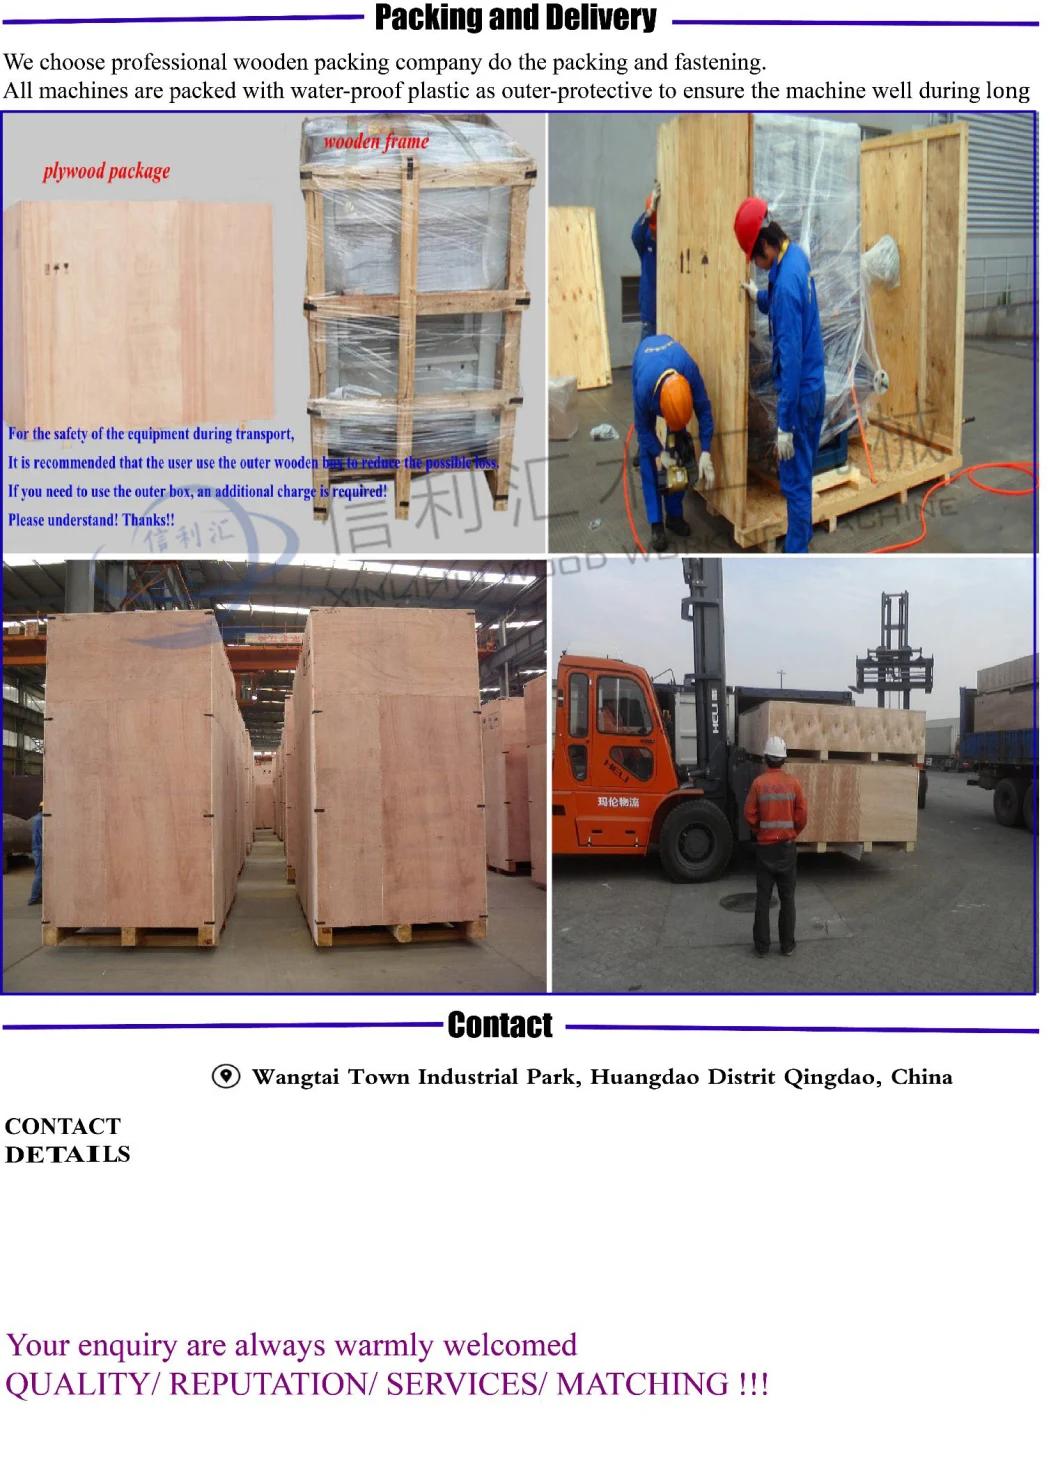 High Pressure Stick Machine Intelligent Hot Press for Fire Rated Particleboard, Fire Board and Bakelite Sheet, Machine for Paper Sticking on MDF Board